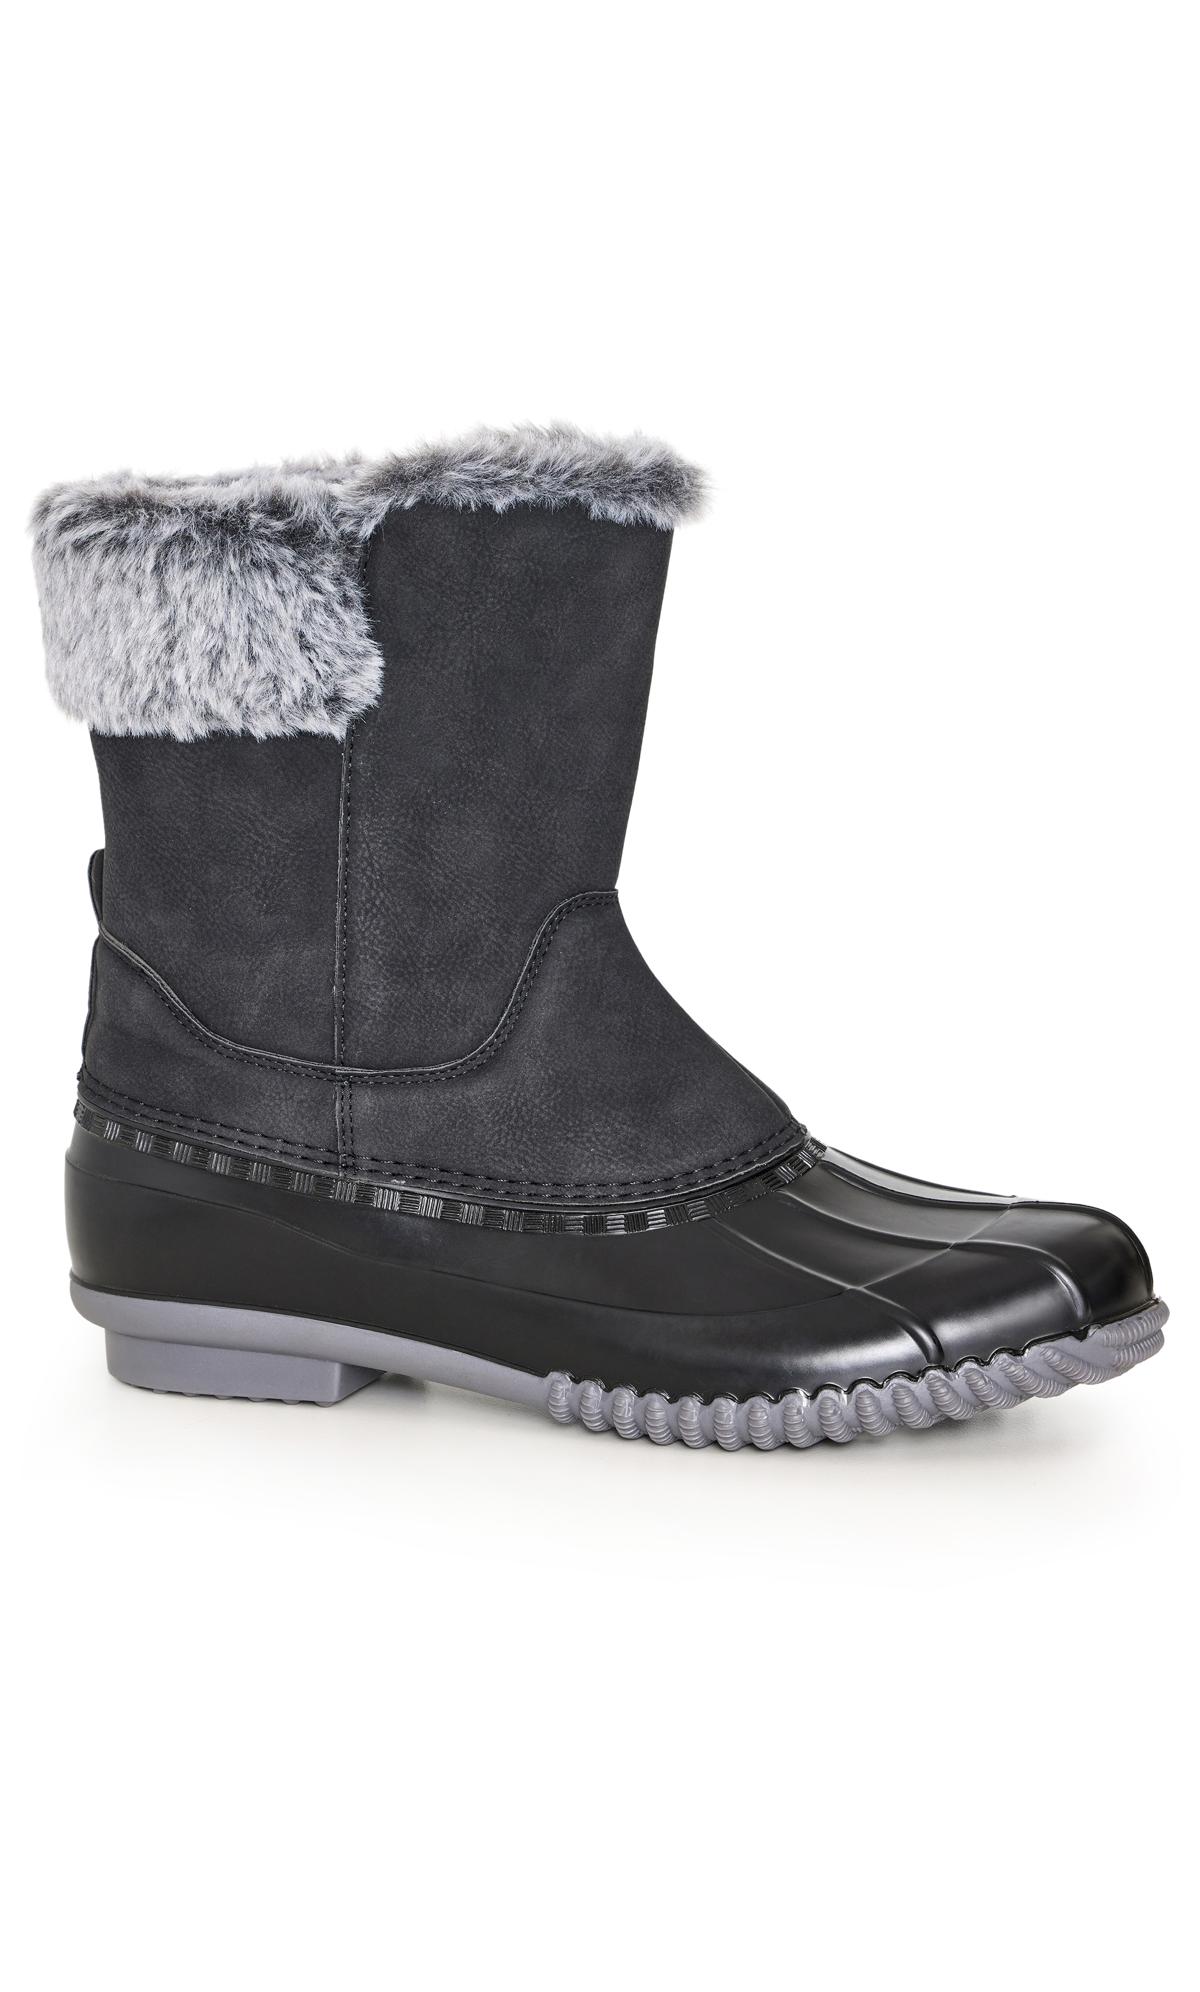 Avenue WIDE FIT Black Faux Fur Lined Embroided Snow Boots 1